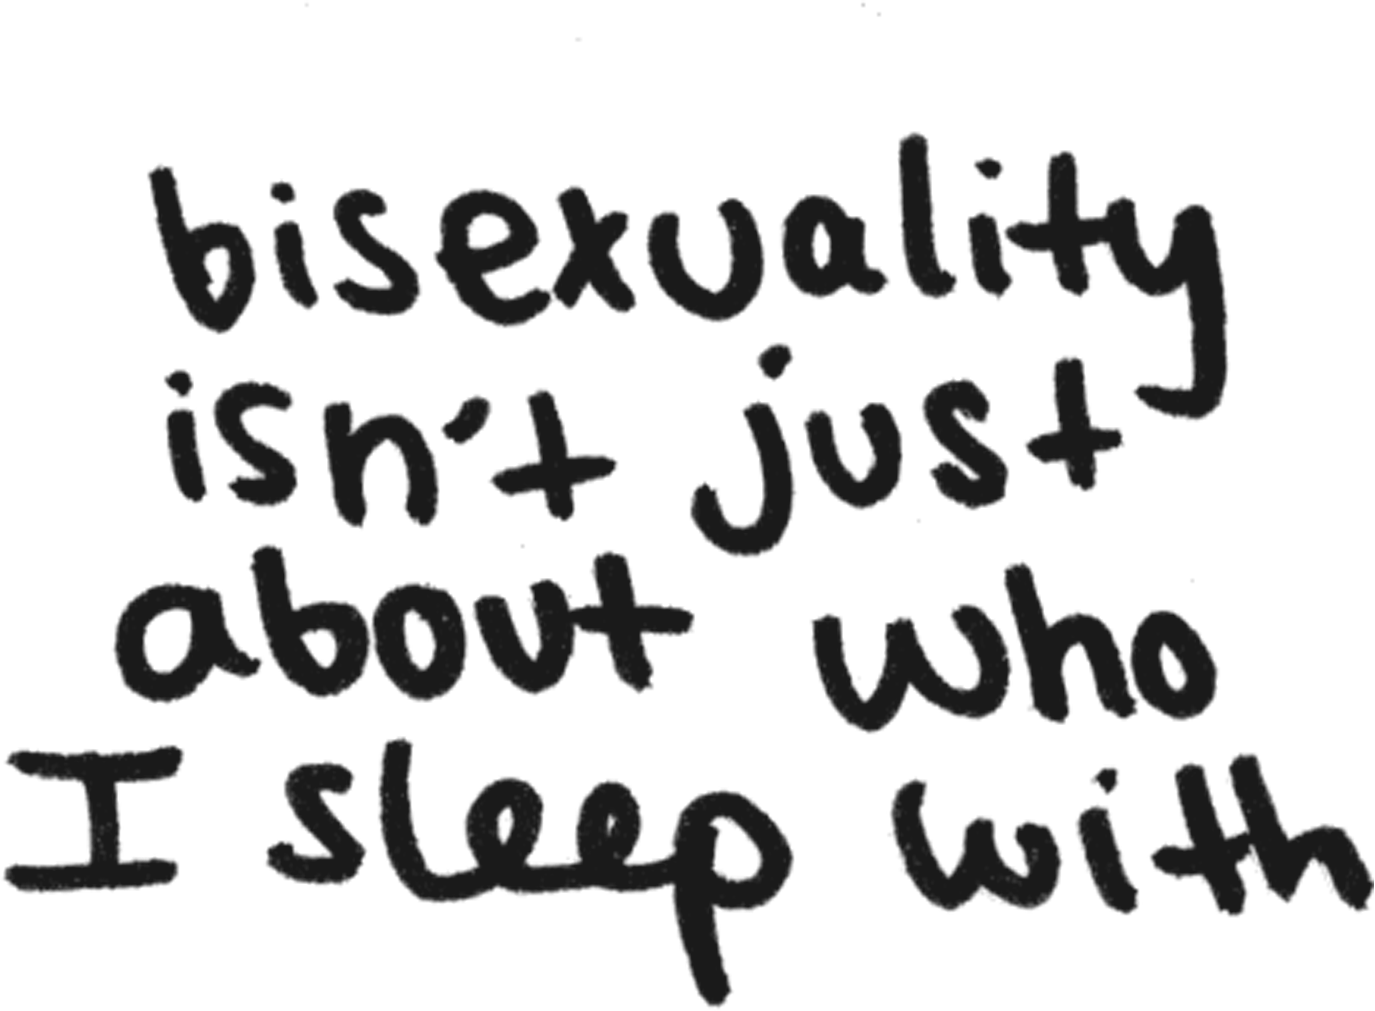 bisexuality isn't just about who I sleep with